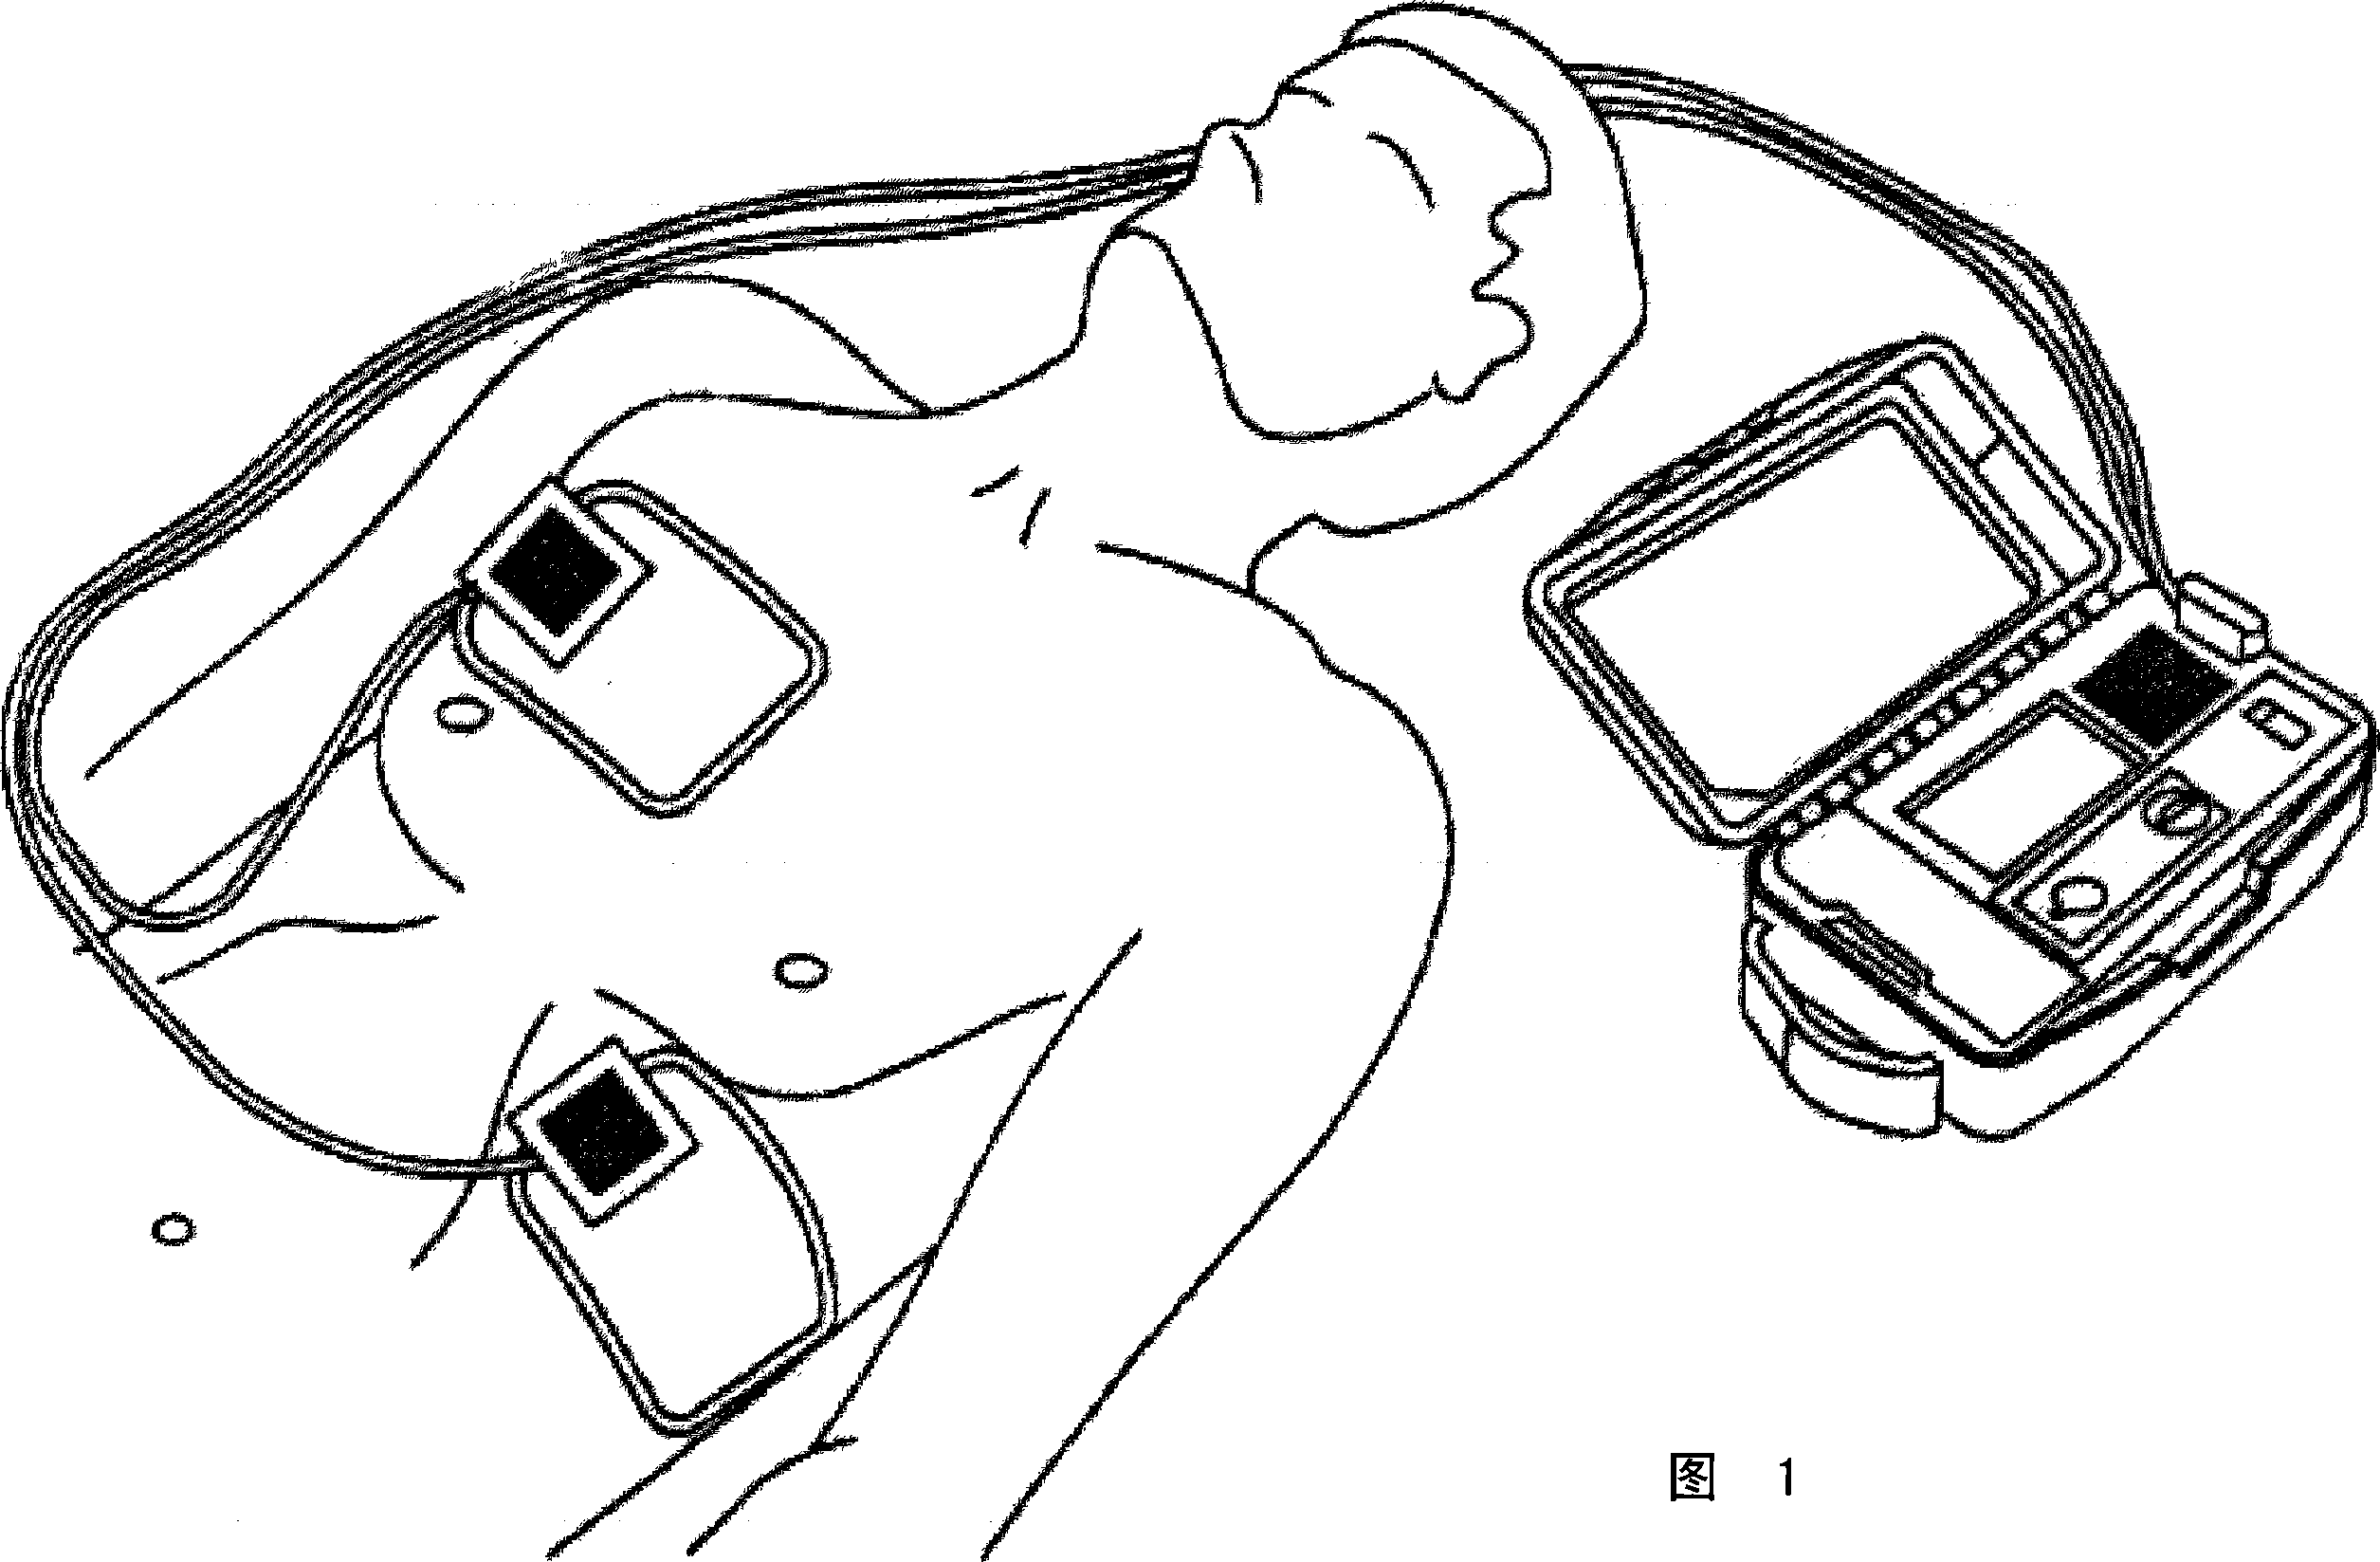 Automated external defibrillator (aed) with discrete sensing pulse for use in configuring a therapeutic biphasic waveform